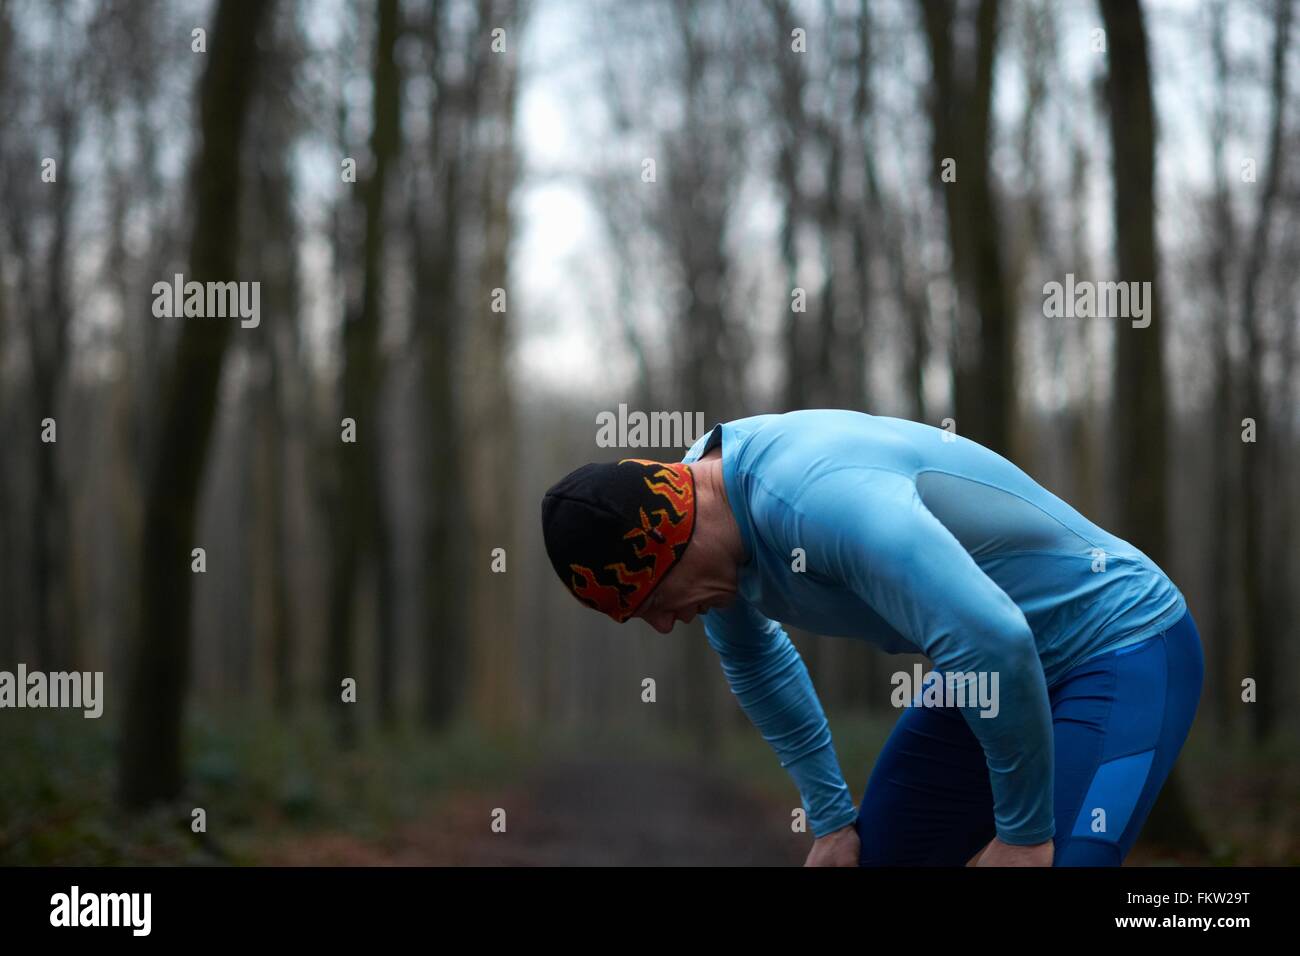 Runner wearing knit hat and spandex bending forward hands on knees exhausted Stock Photo